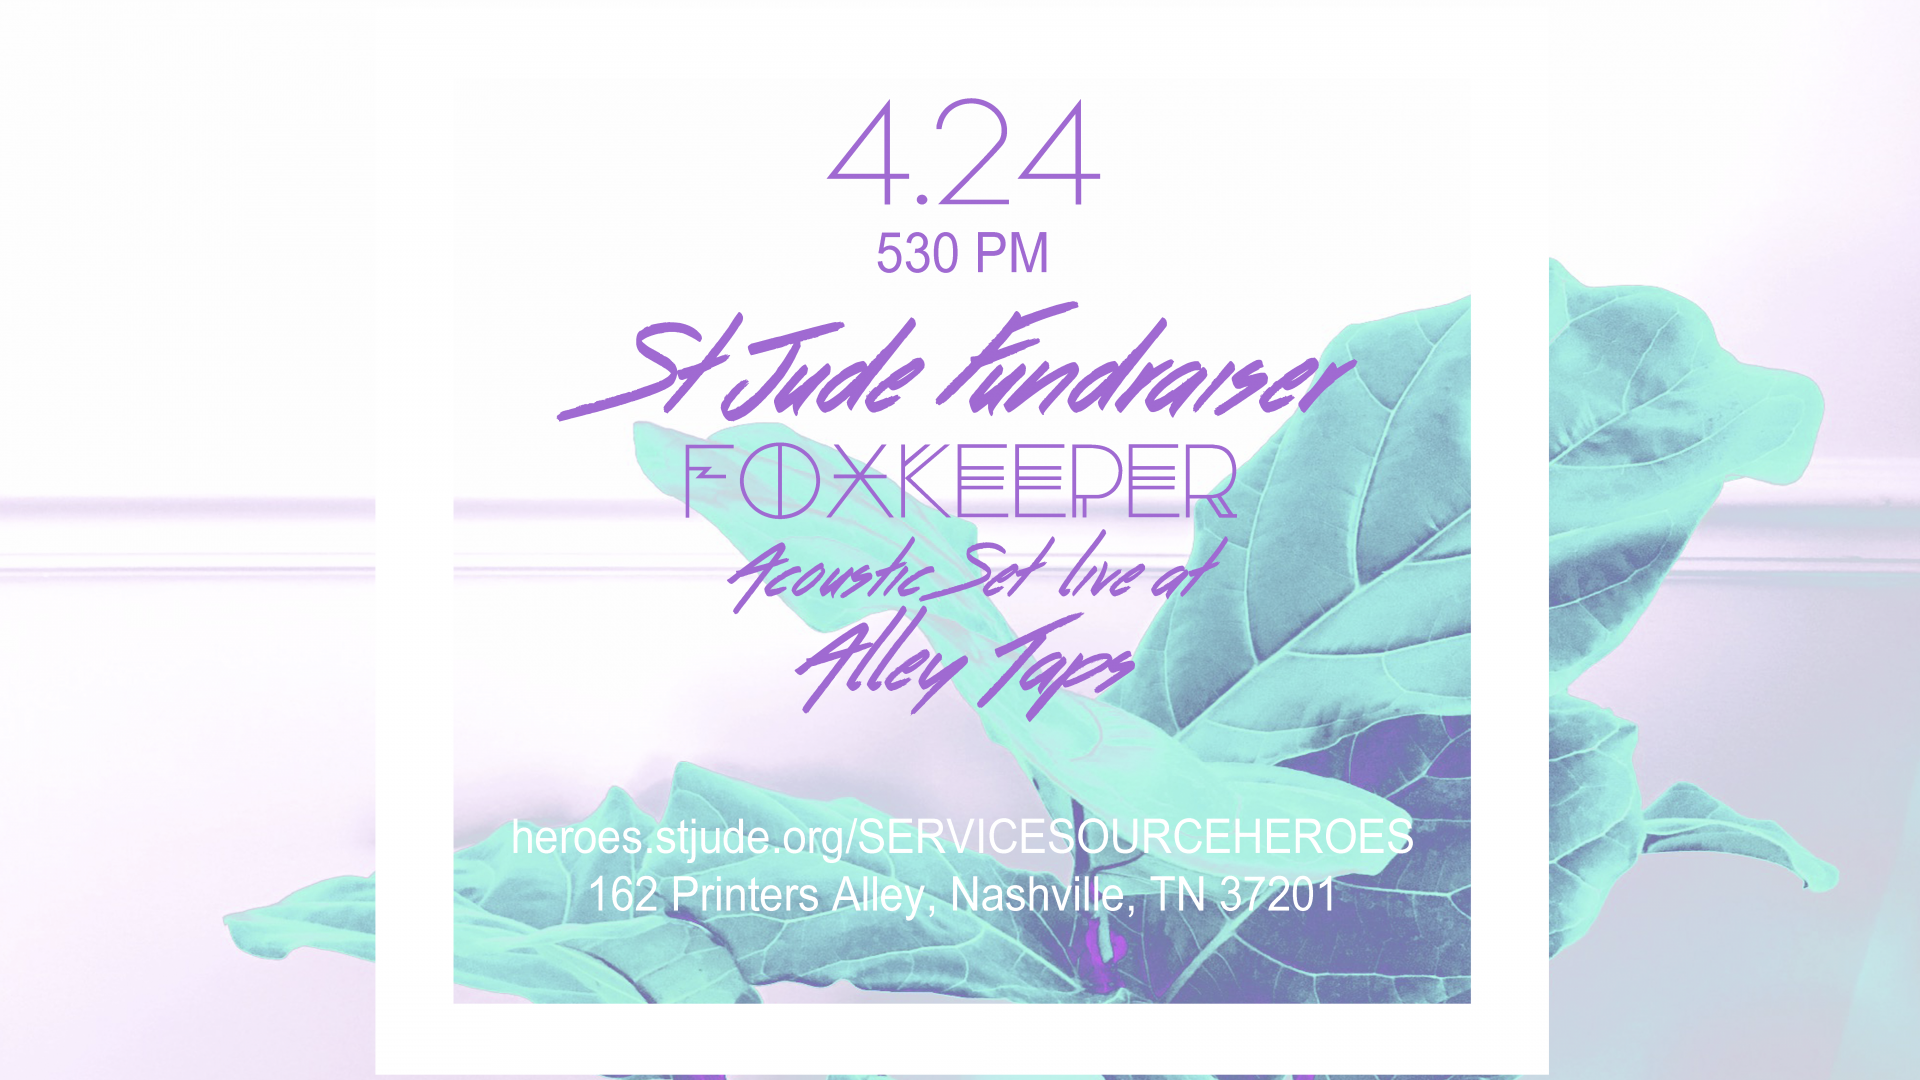 st jude fundraiser foxkeeper live at alley taps in nashville tn acoustic set